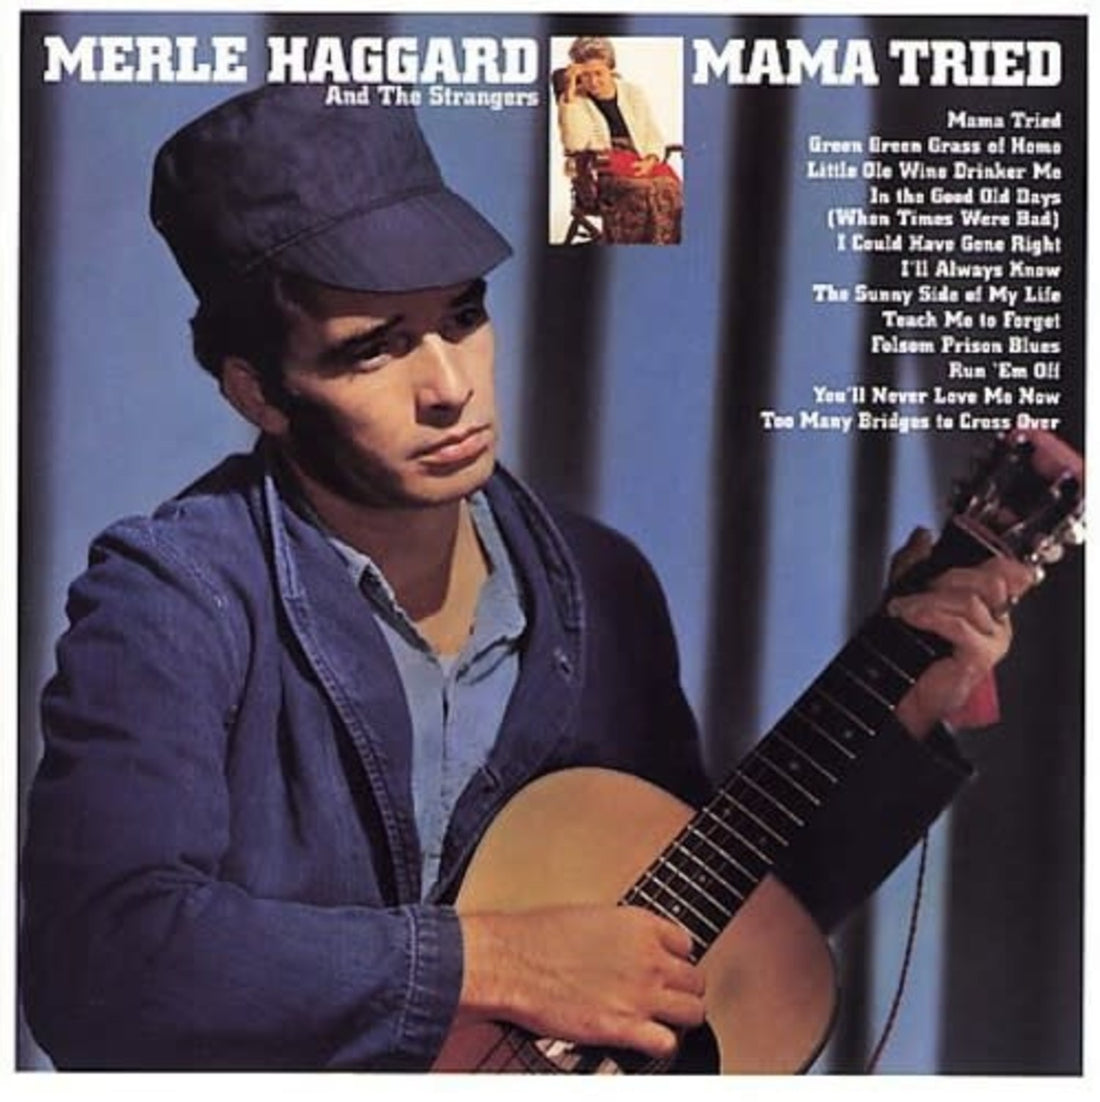 From the National Recording Registry: “Mama Tried” by Merle Haggard (1968)